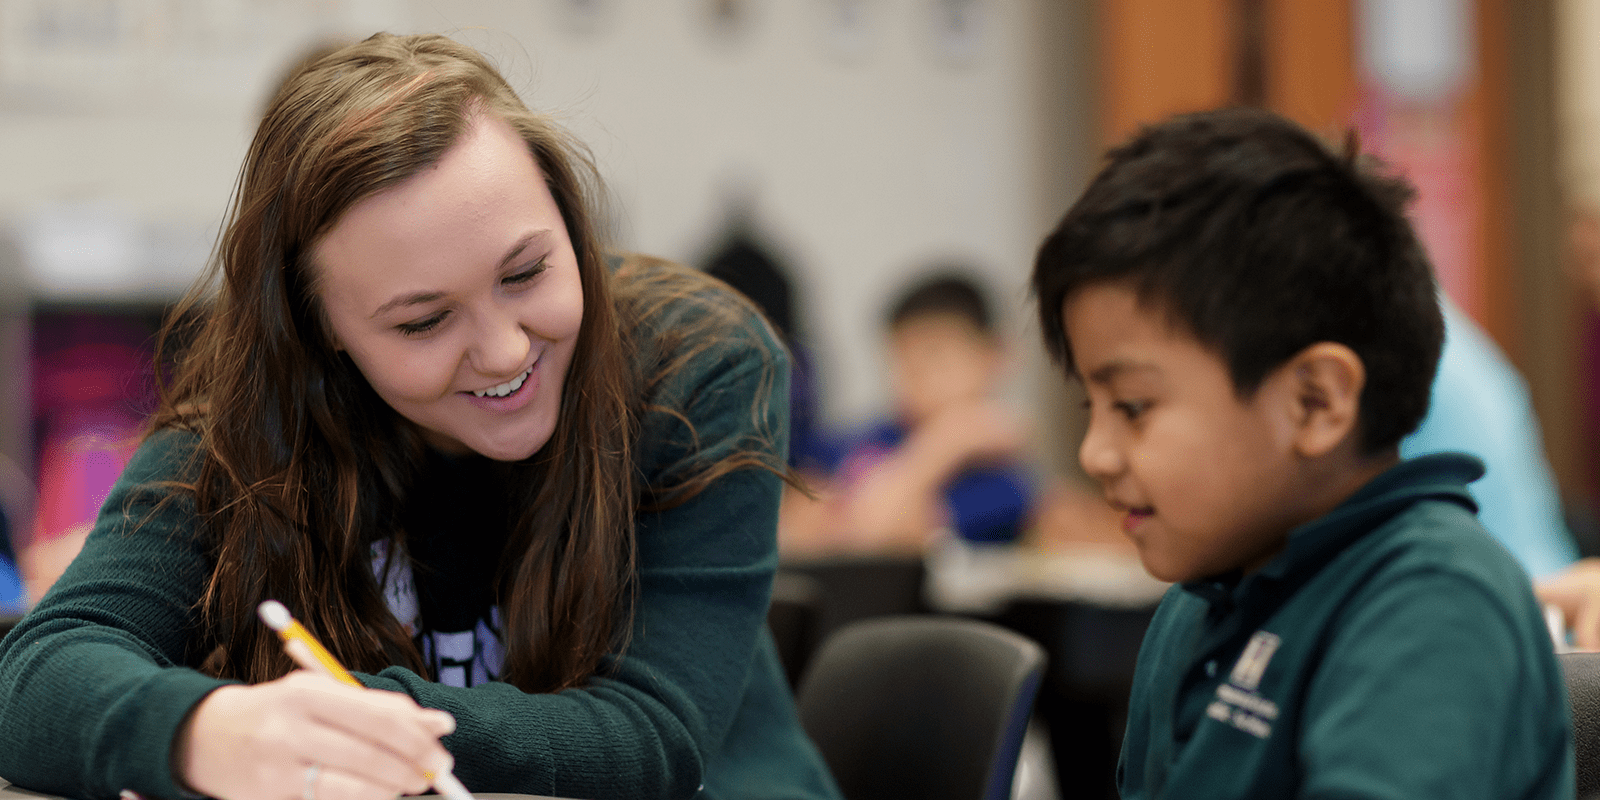 teacher in green shirt teaching English as second language to young student